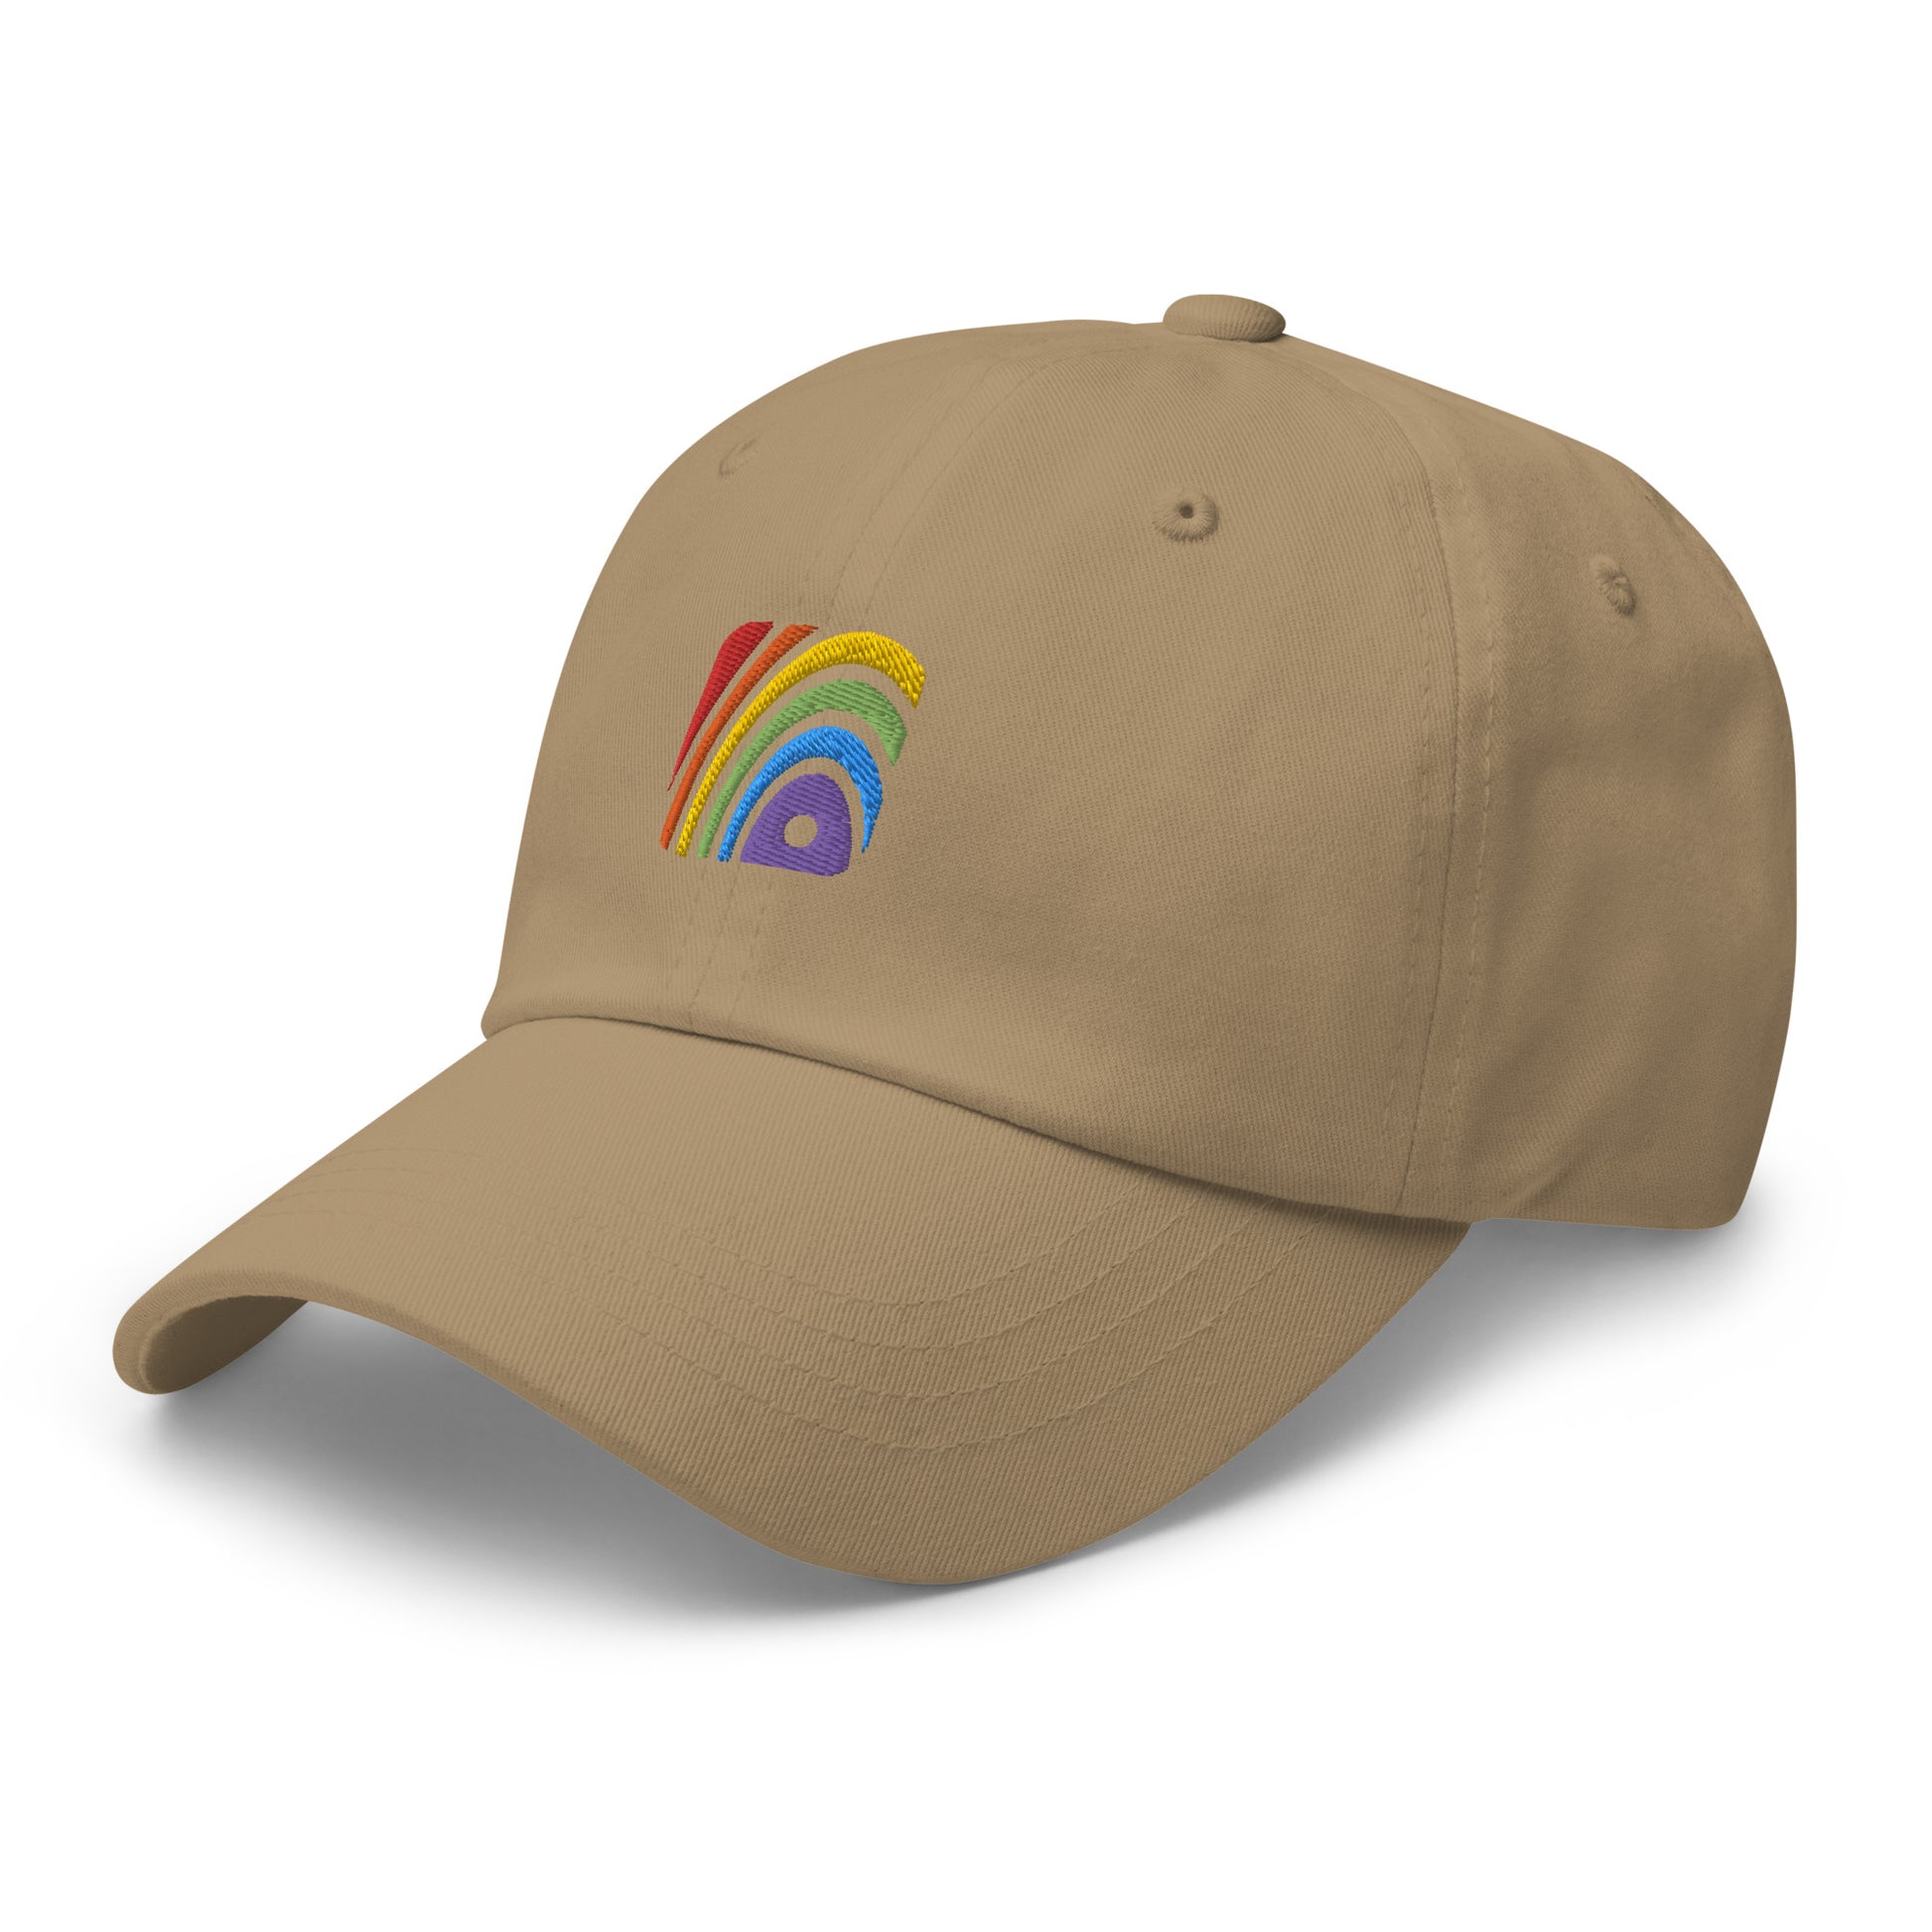 Khaki baseball hat featuring rainbow design embroidery with a low profile, adjustable strap.